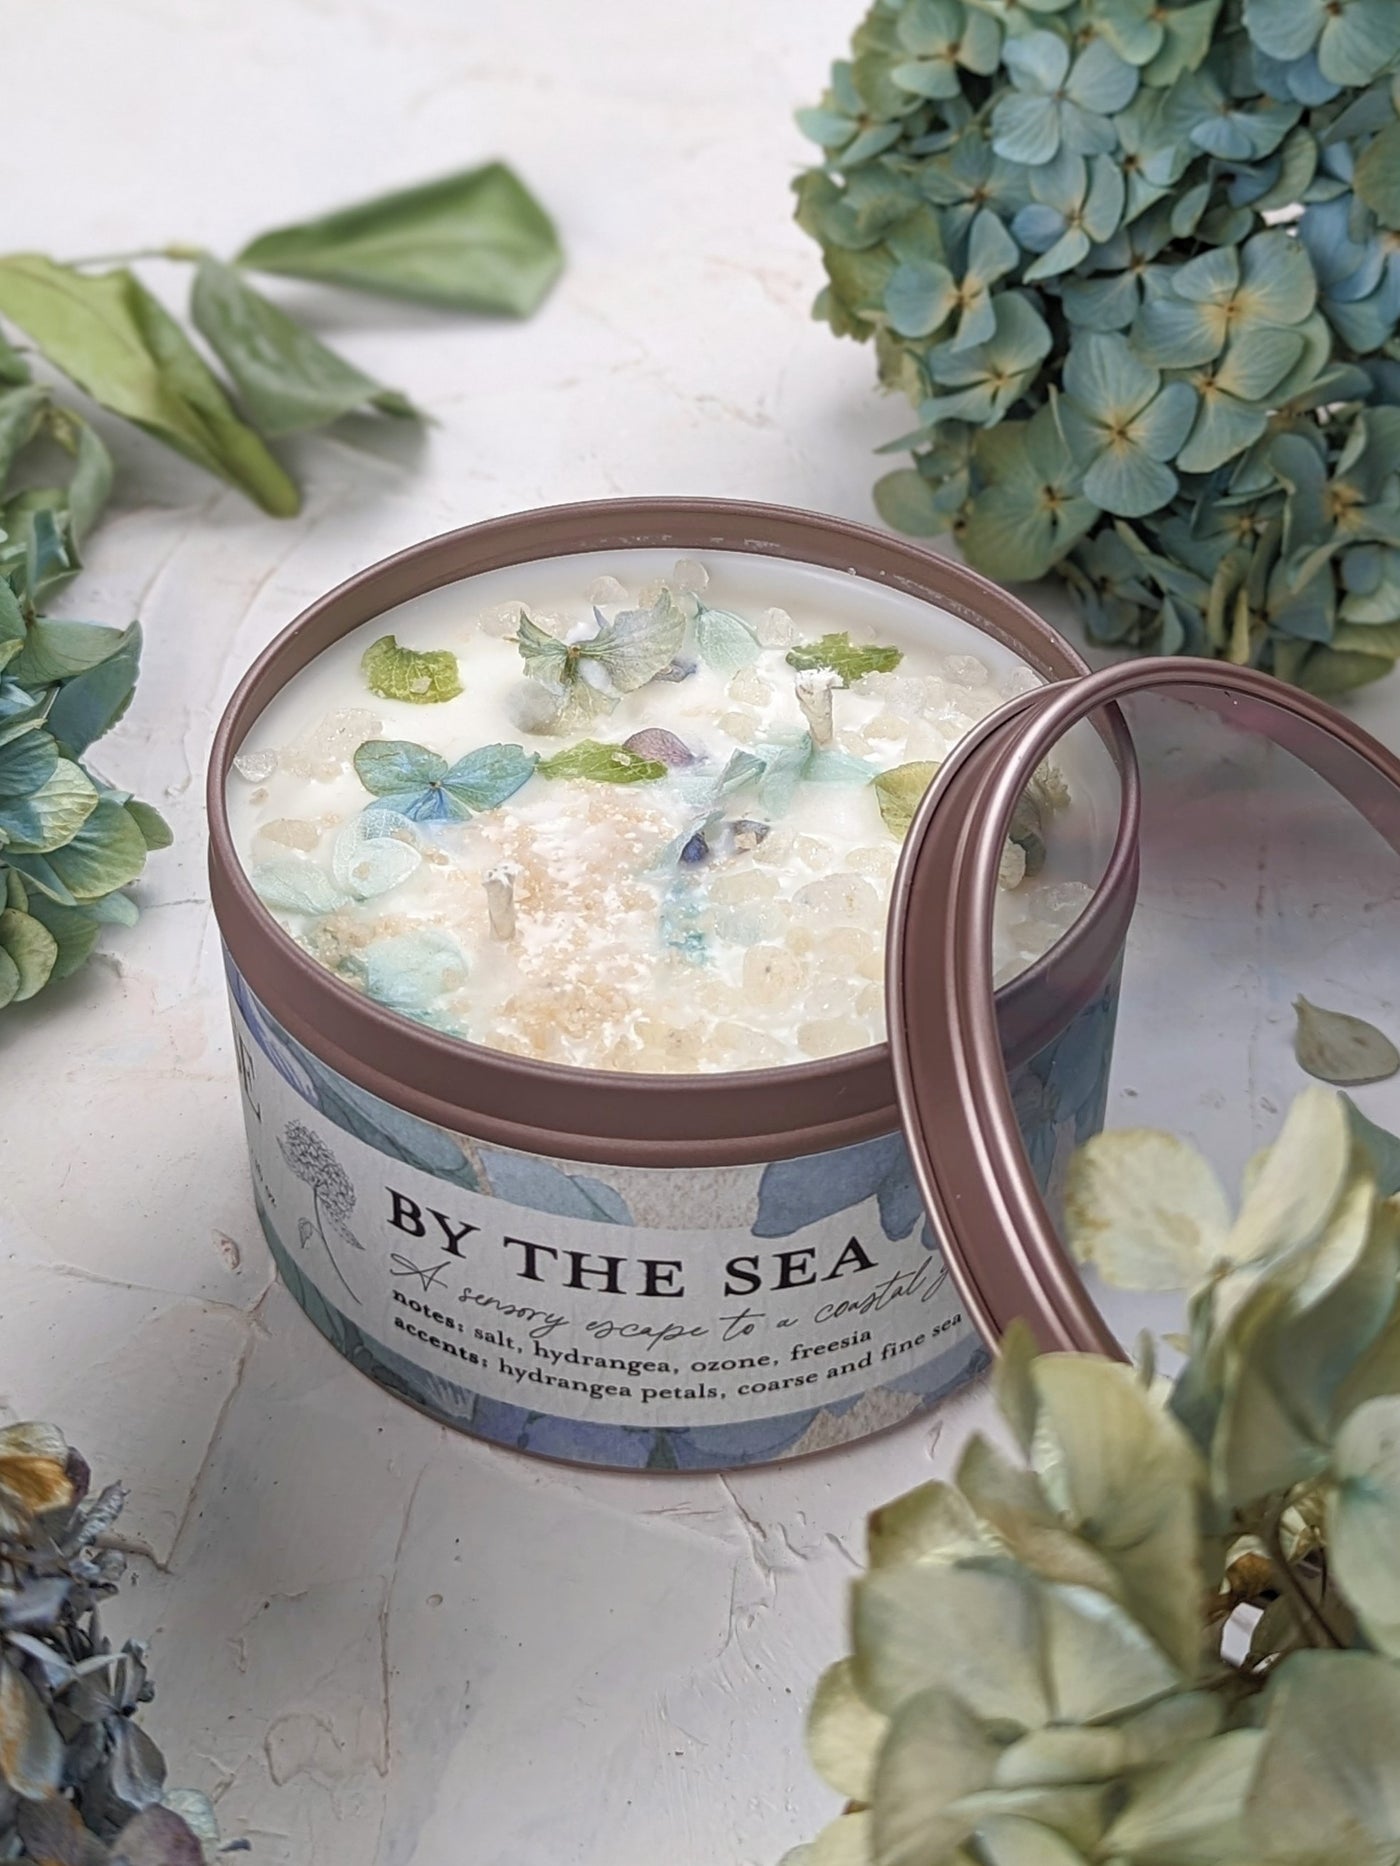 By the Sea - Hydrangea and Sea Salt Candle